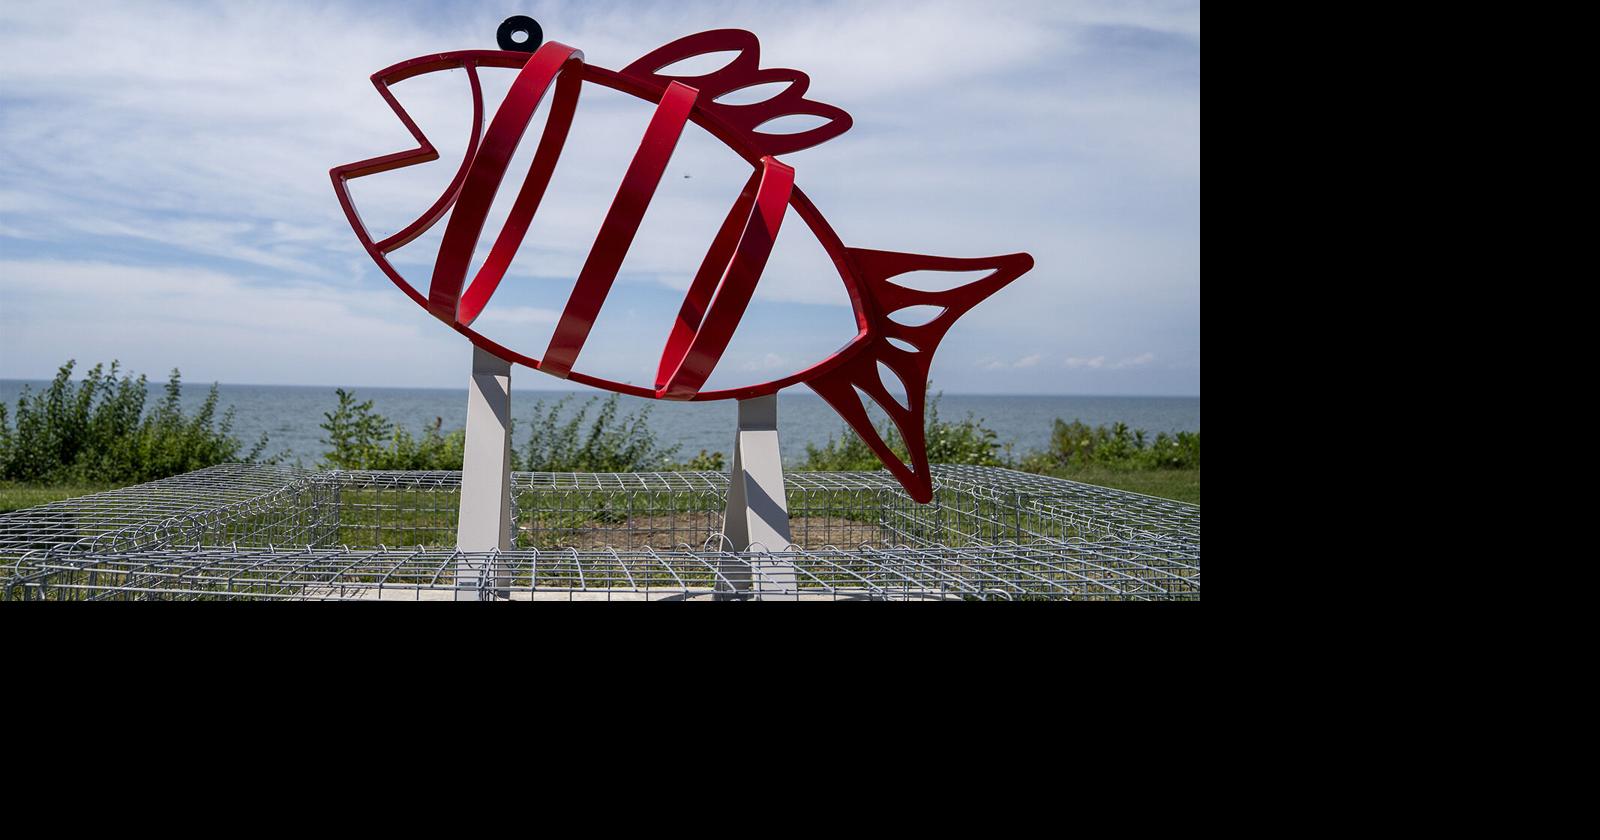 Port Clinton installs giant metal fish sculpture to collect